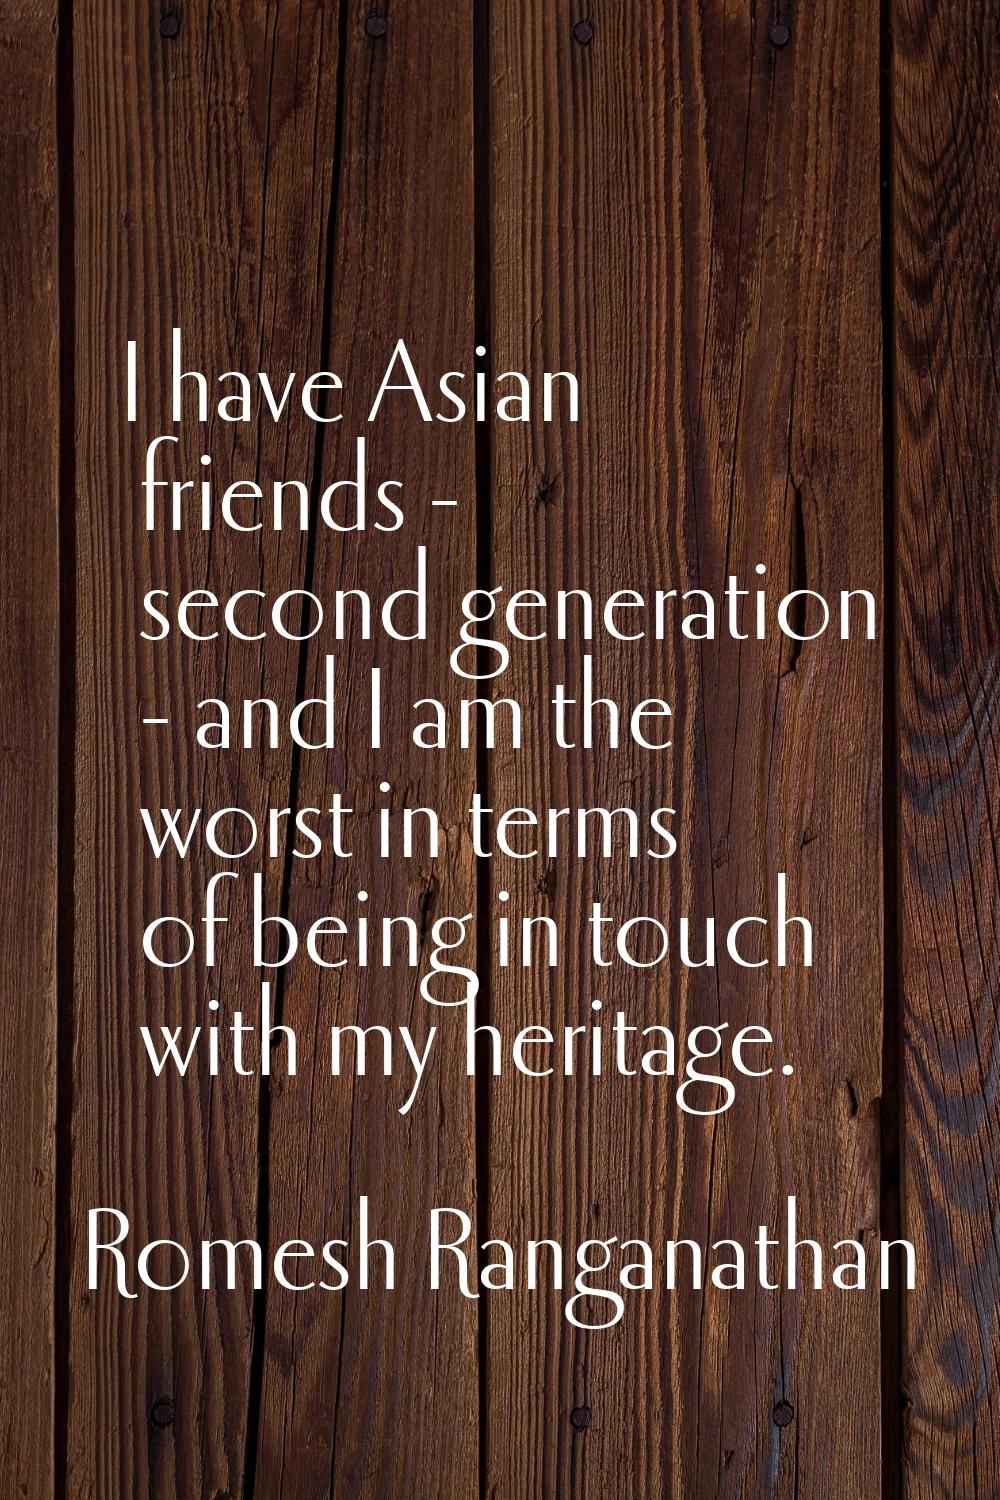 I have Asian friends - second generation - and I am the worst in terms of being in touch with my he